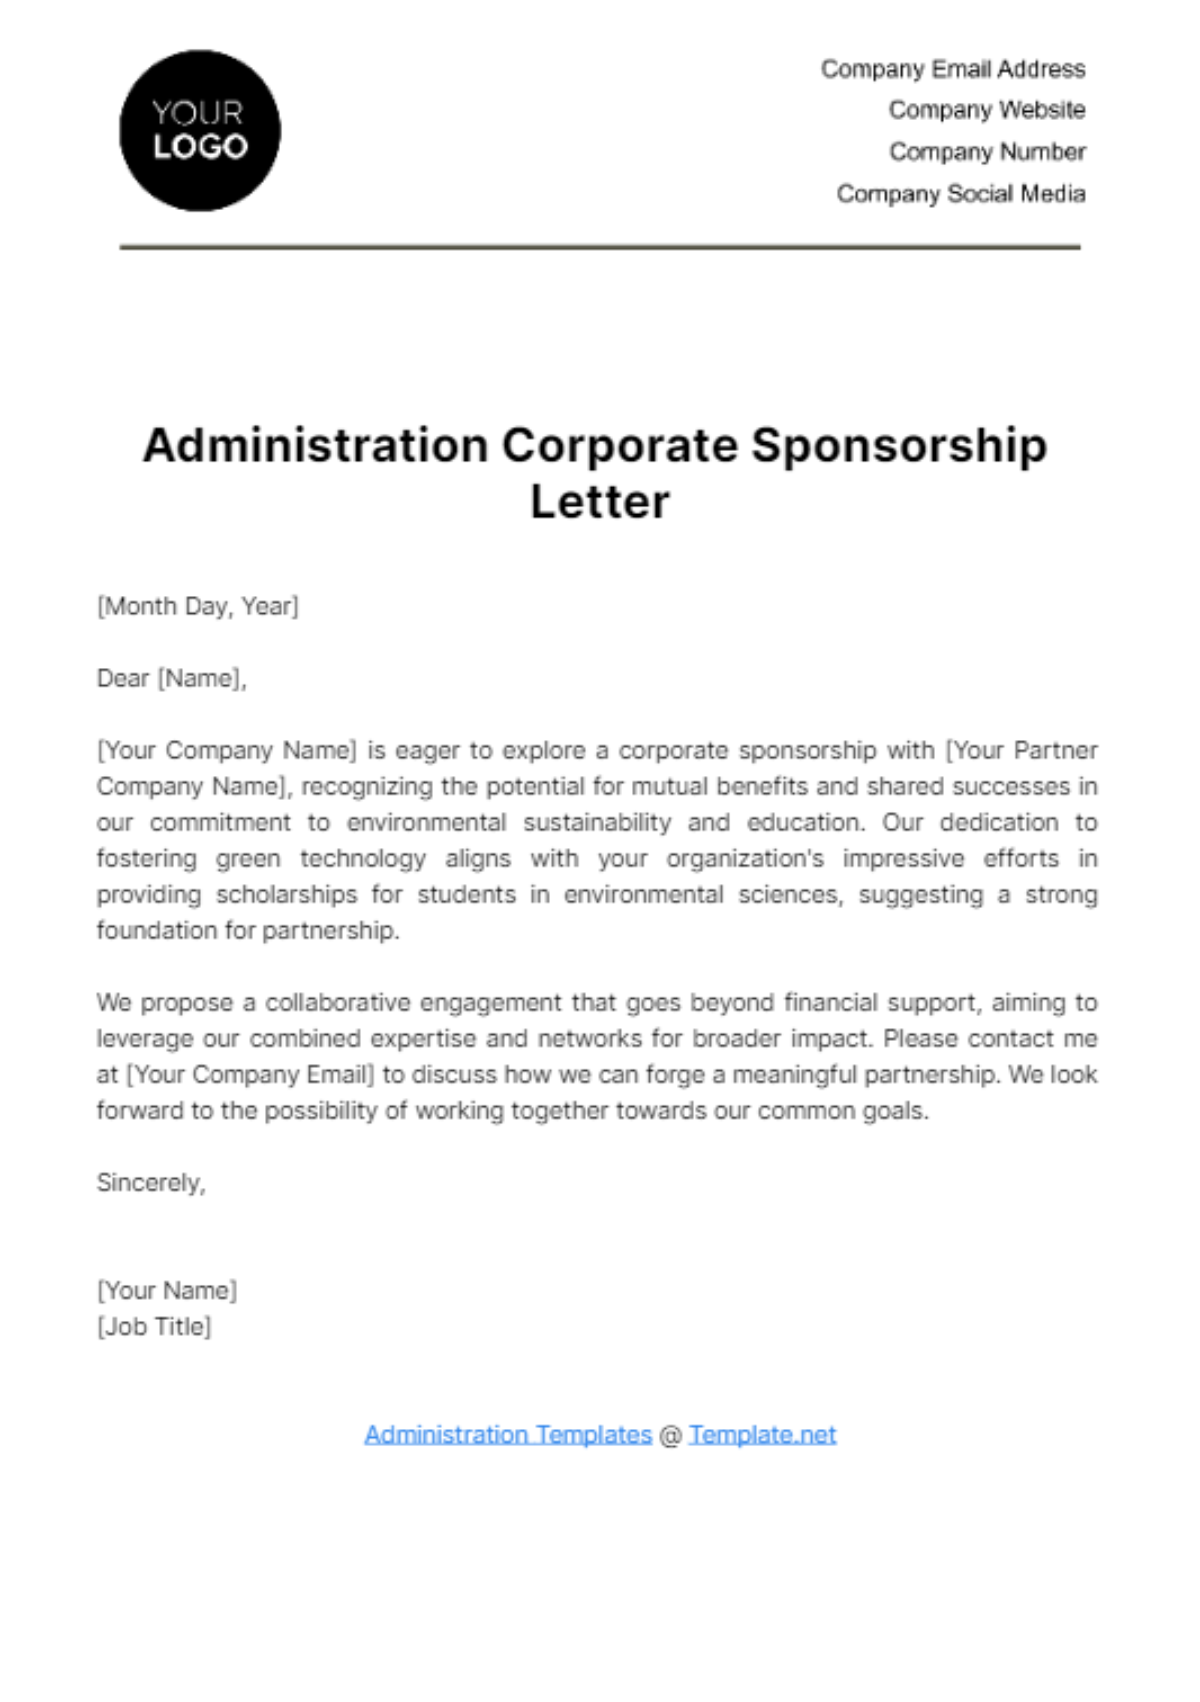 Free Administration Corporate Sponsorship Letter Template